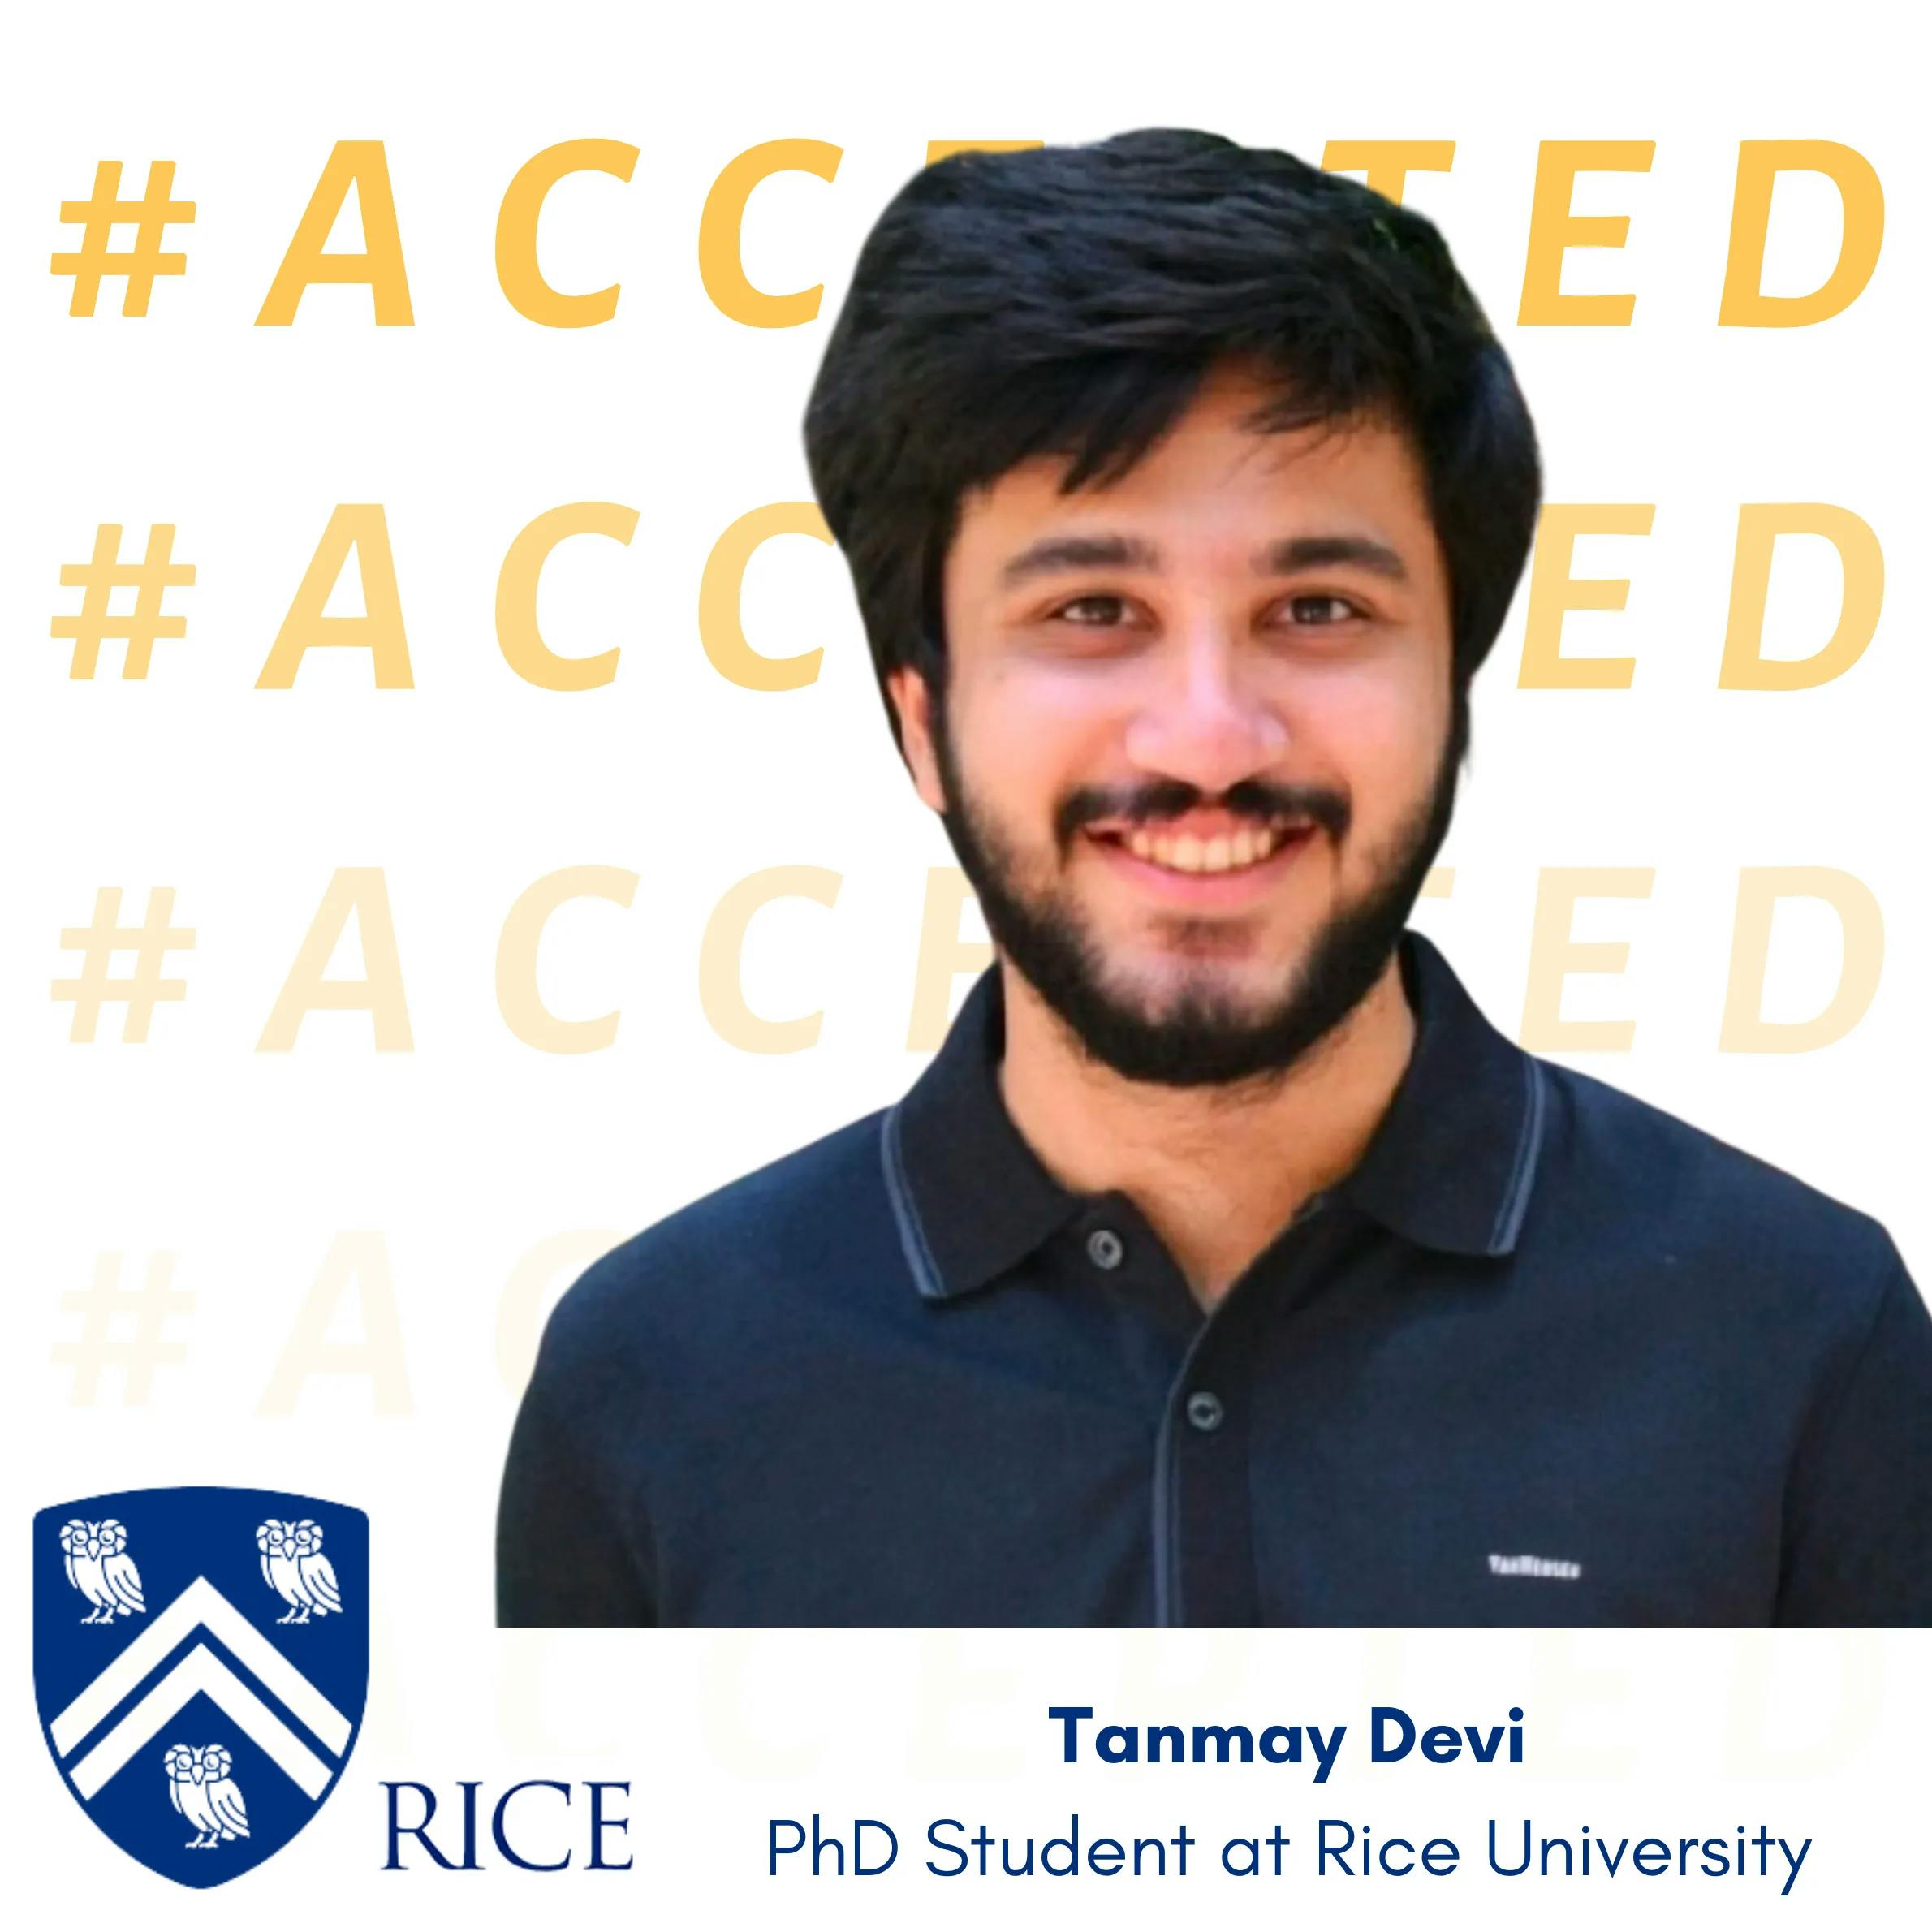 Tanmay Devi admitted to Rice University